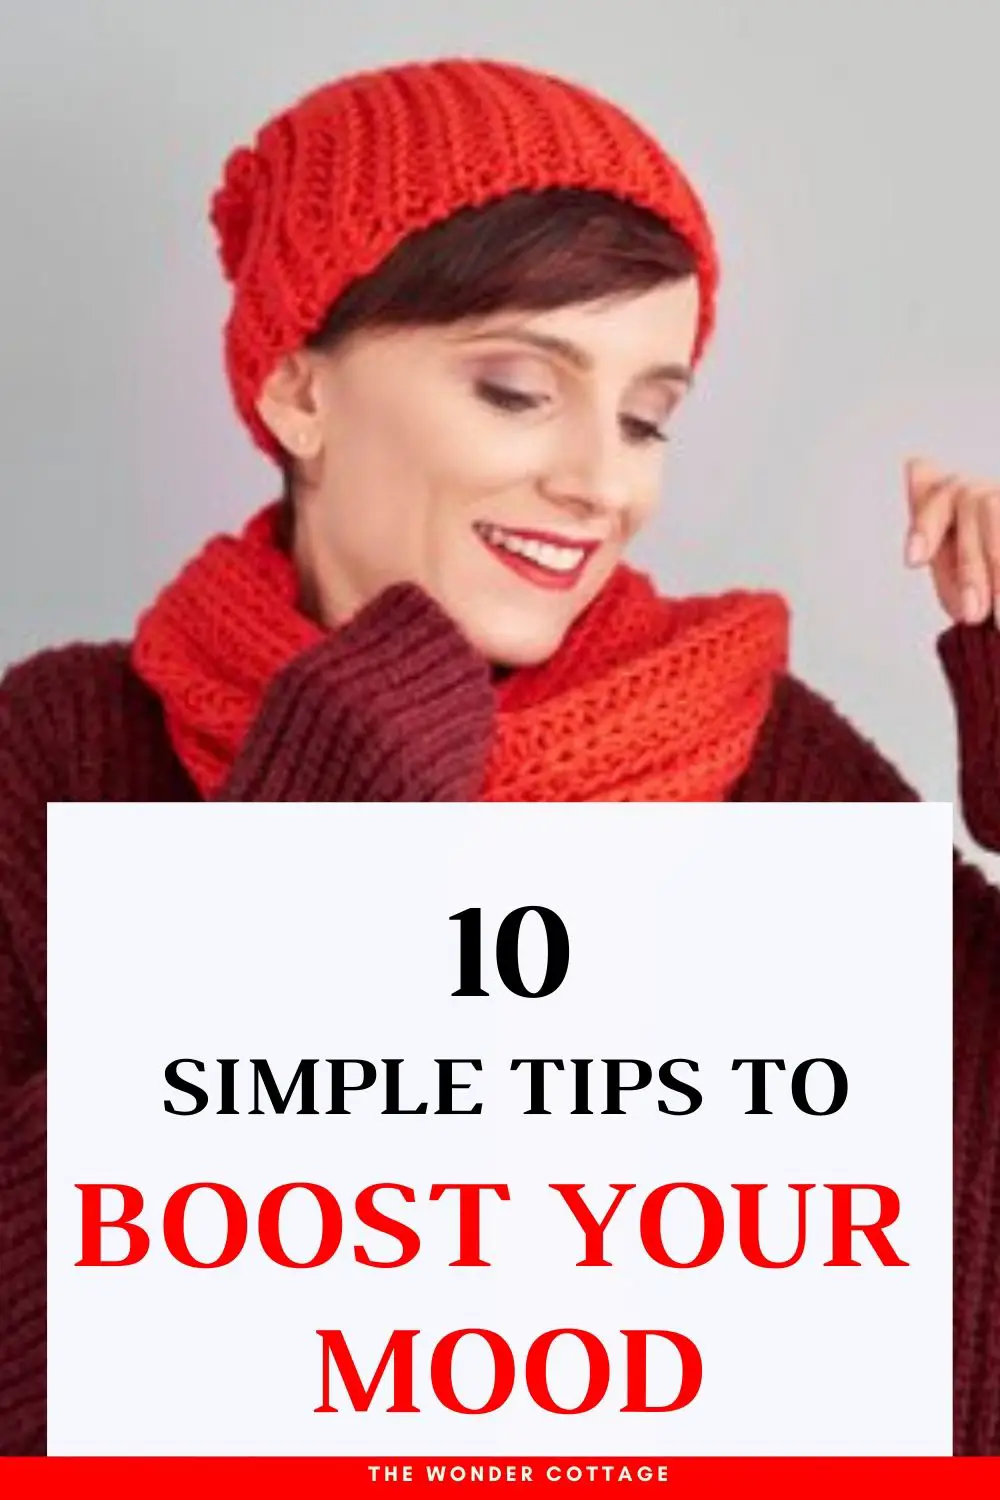 10 simple tips to boost your mood right now